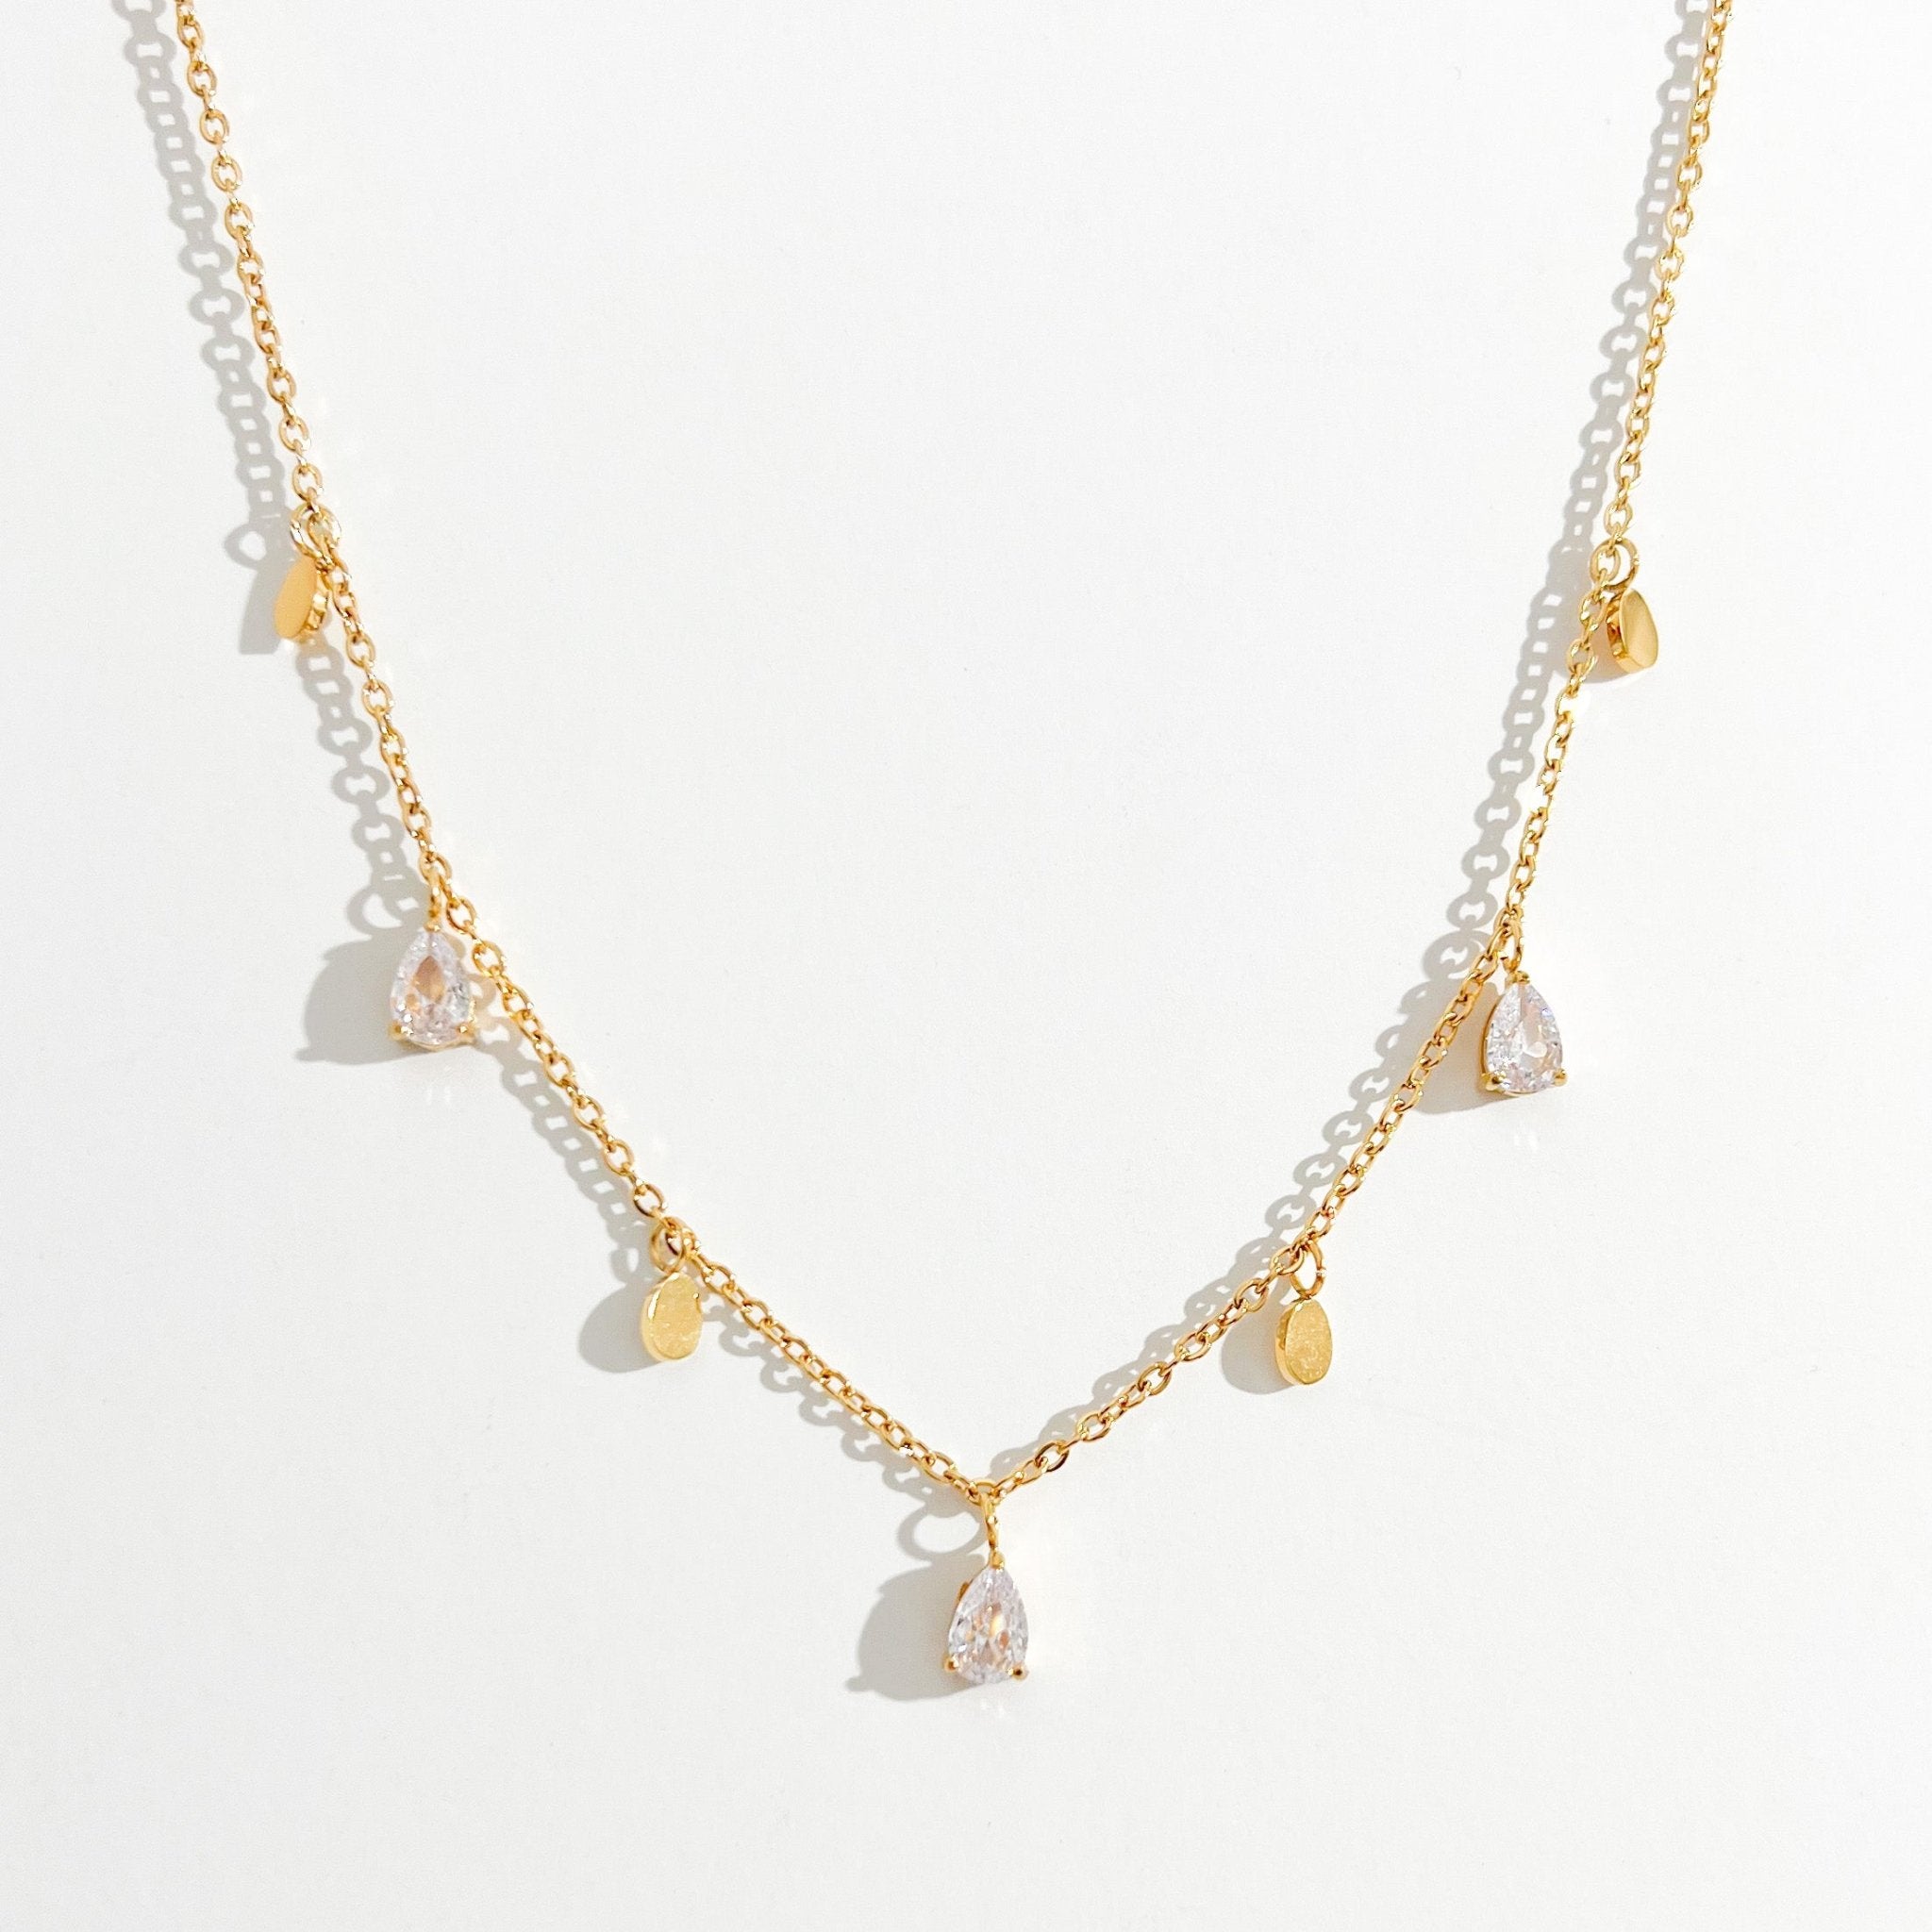 Tear Drops Necklace in Gold - Flaire & Co.